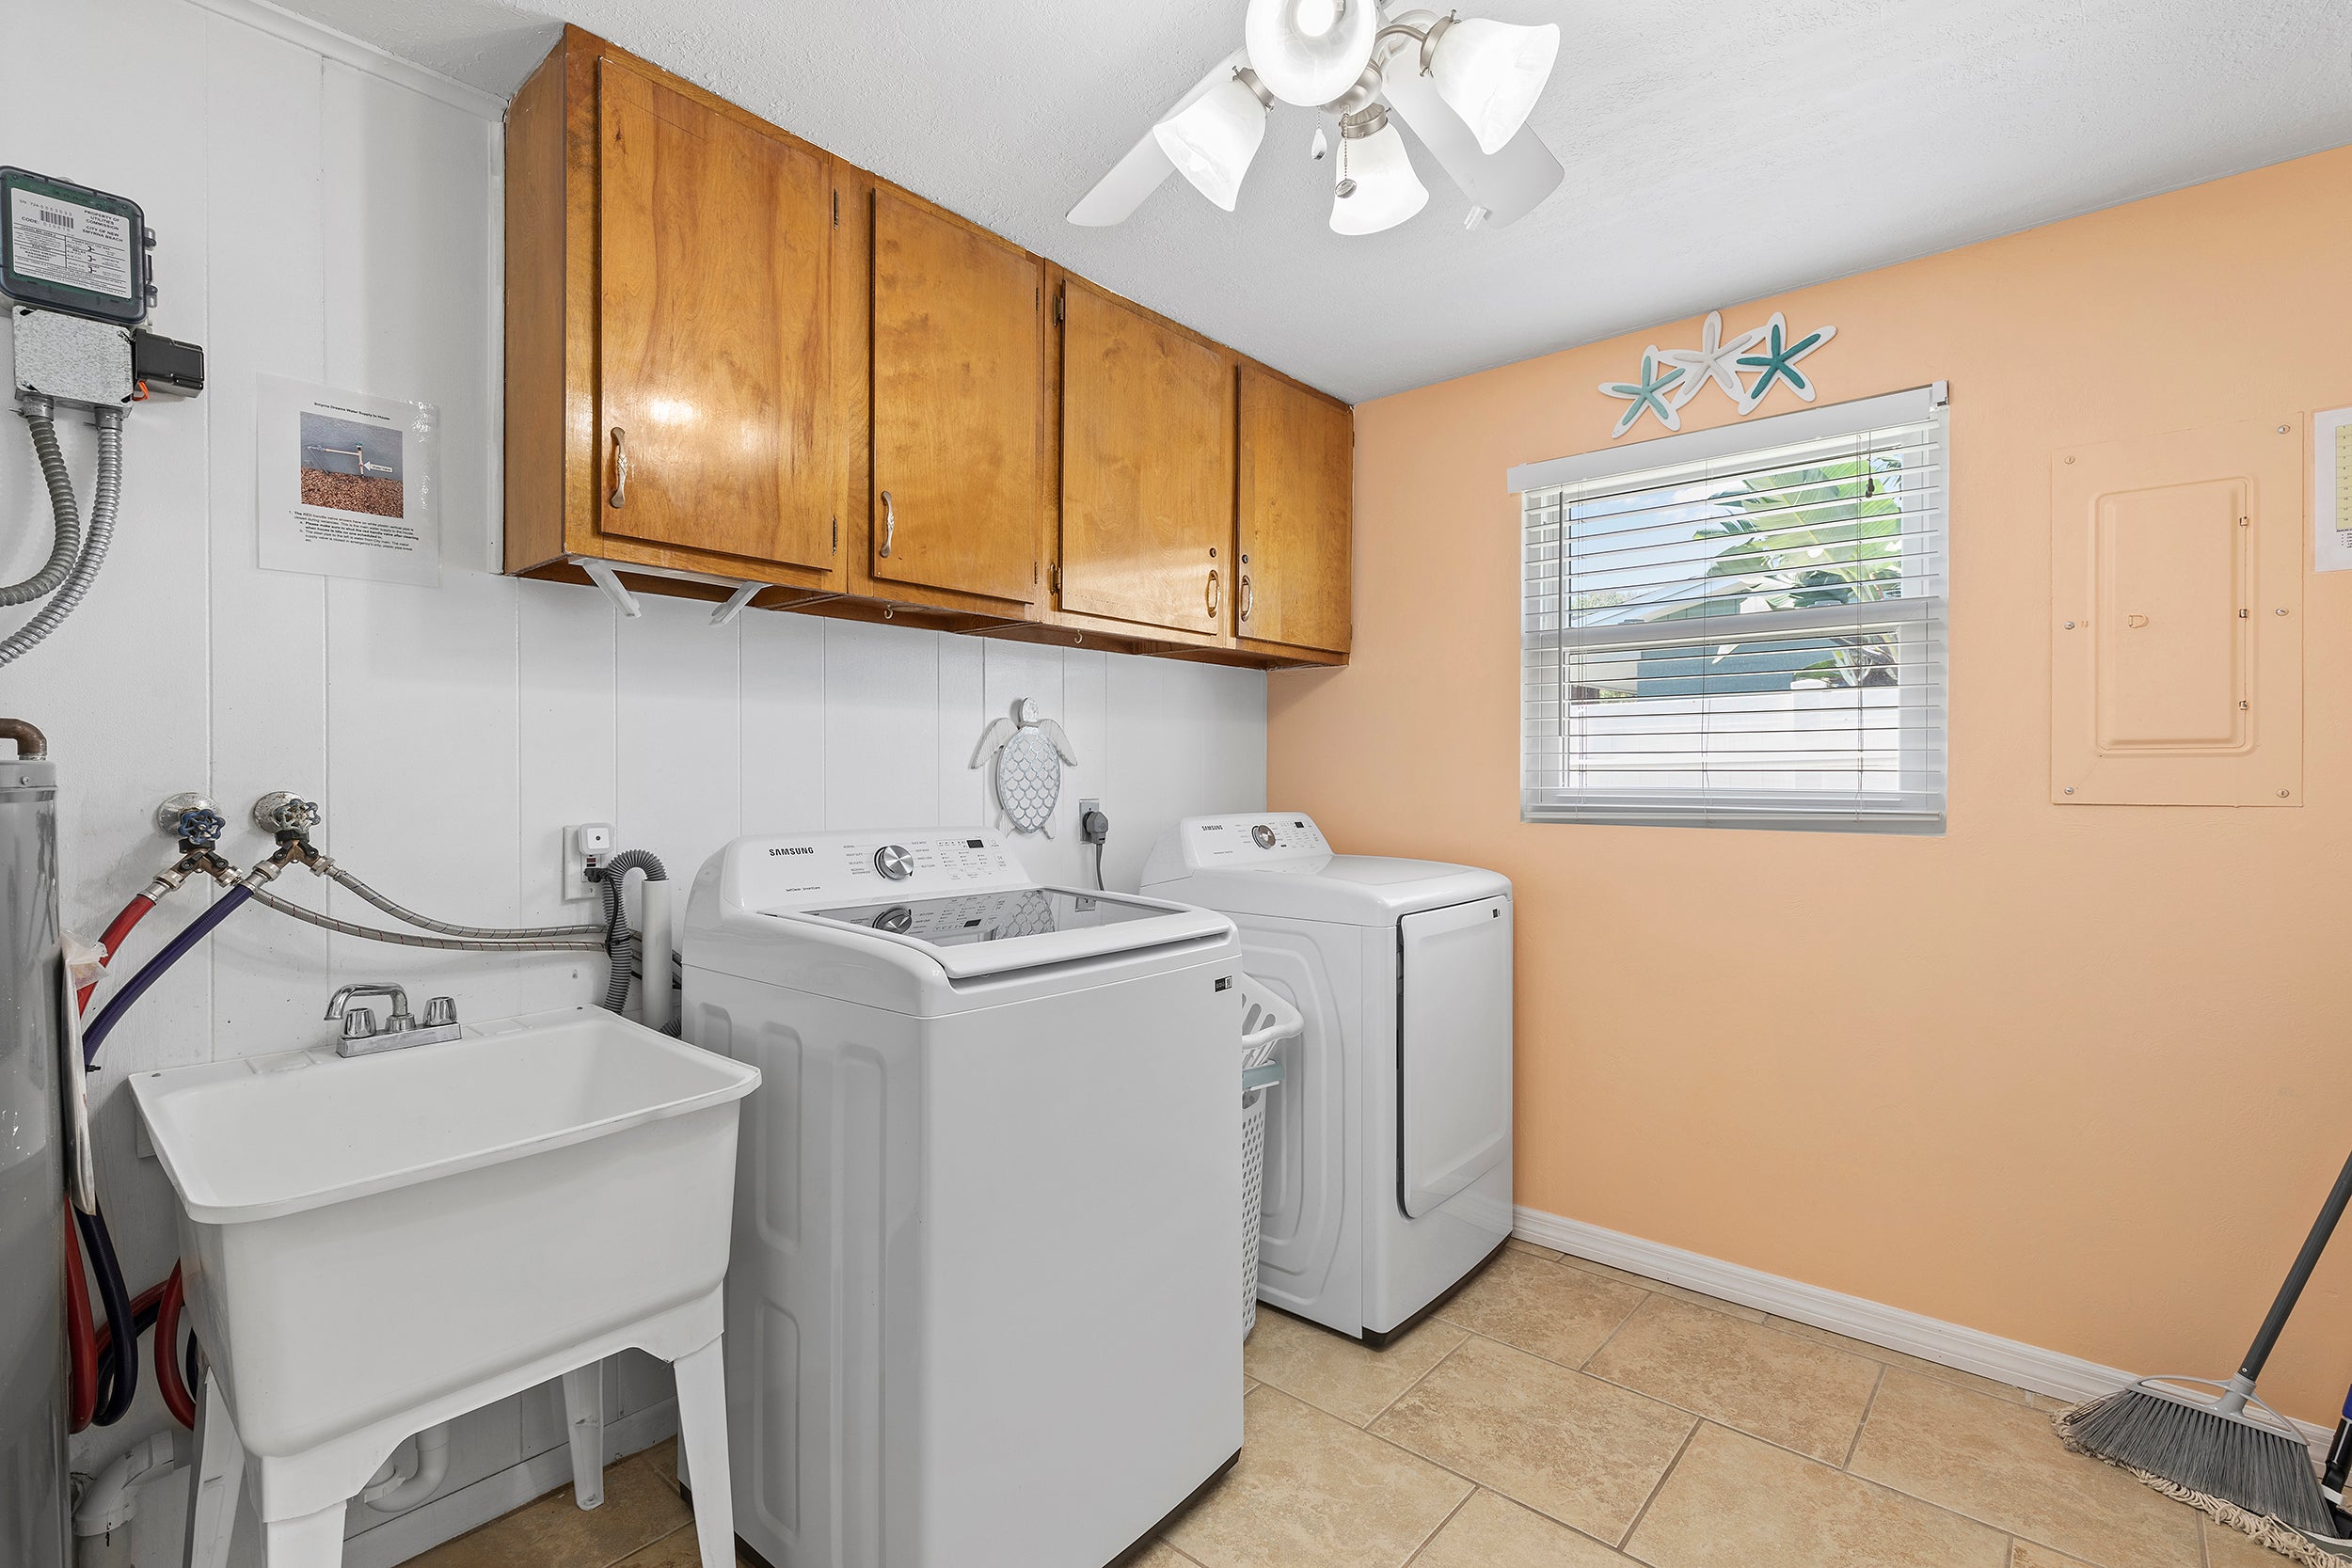 Laundry Area with Utility Sink